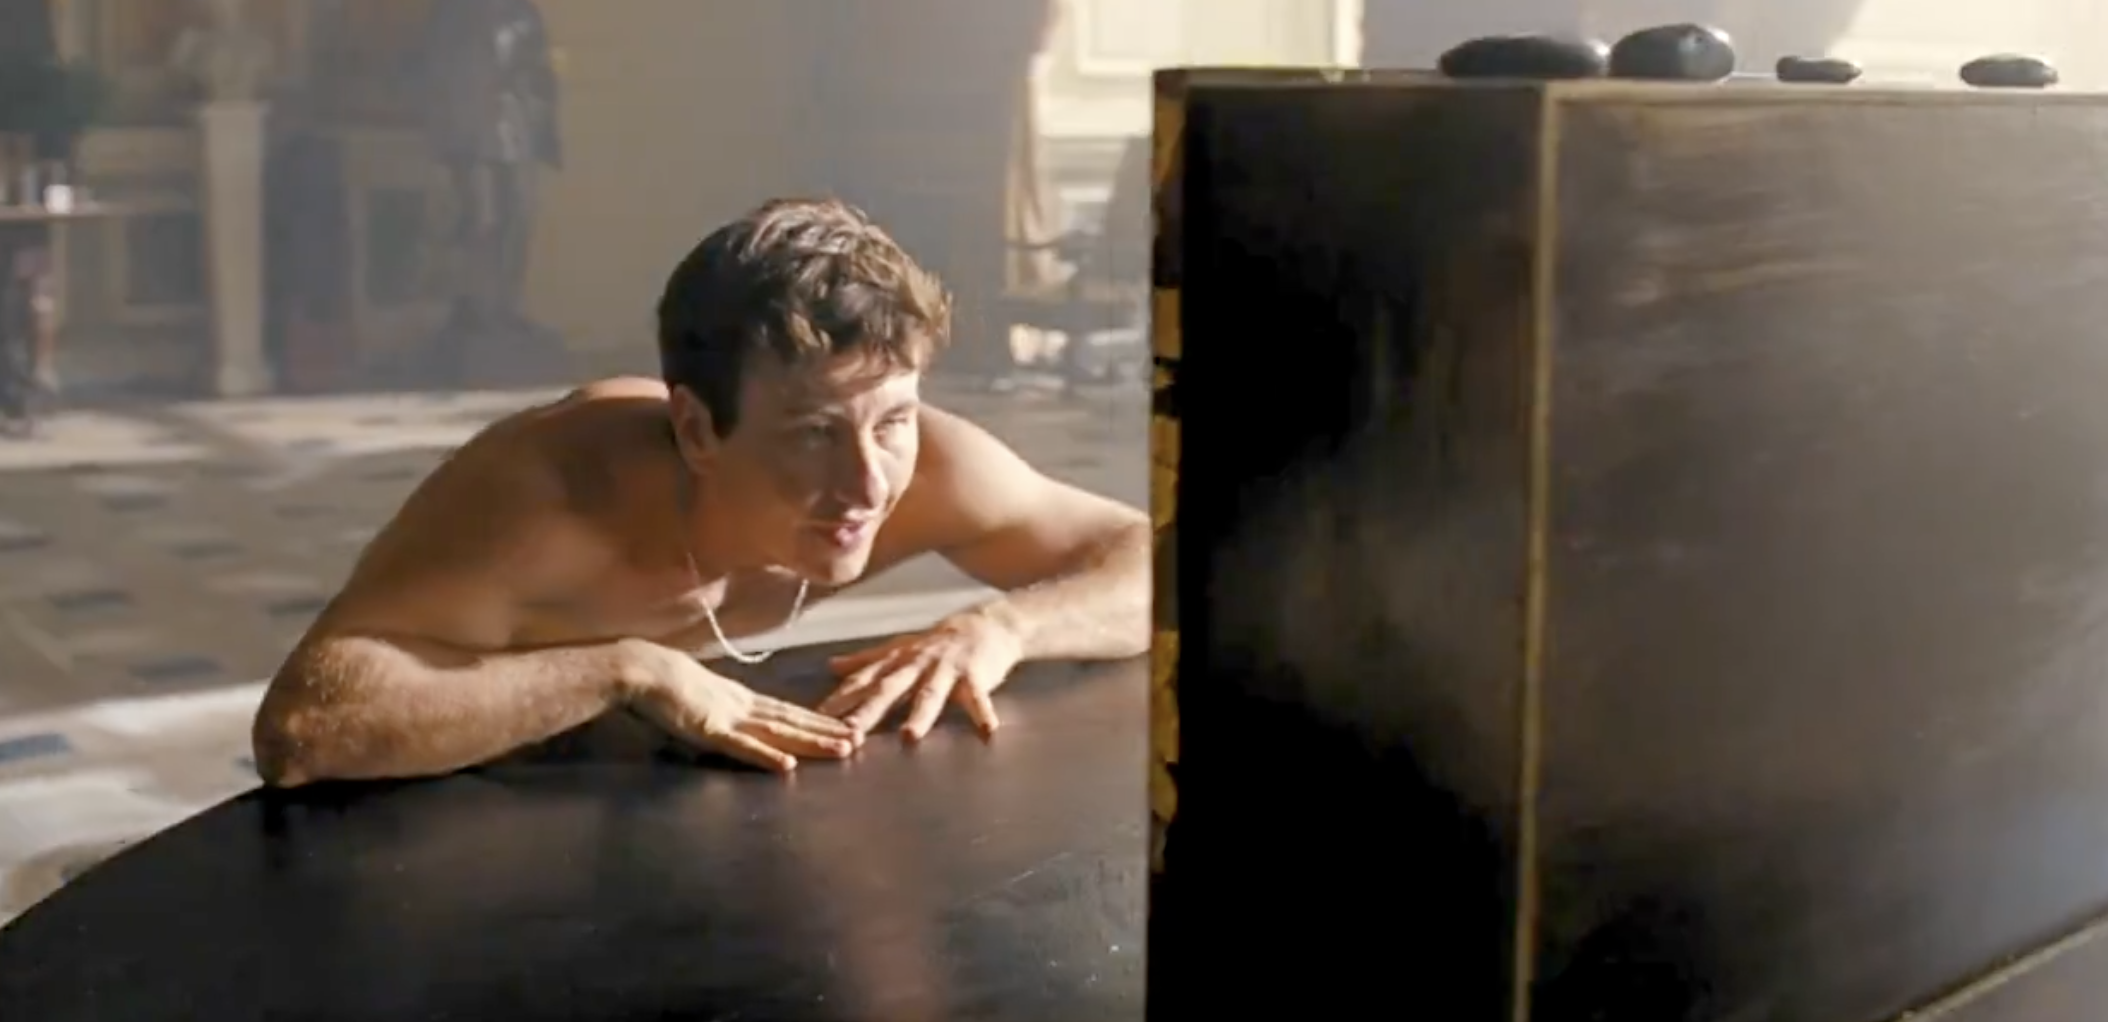 Barry seen naked from the waist up leaning on a table